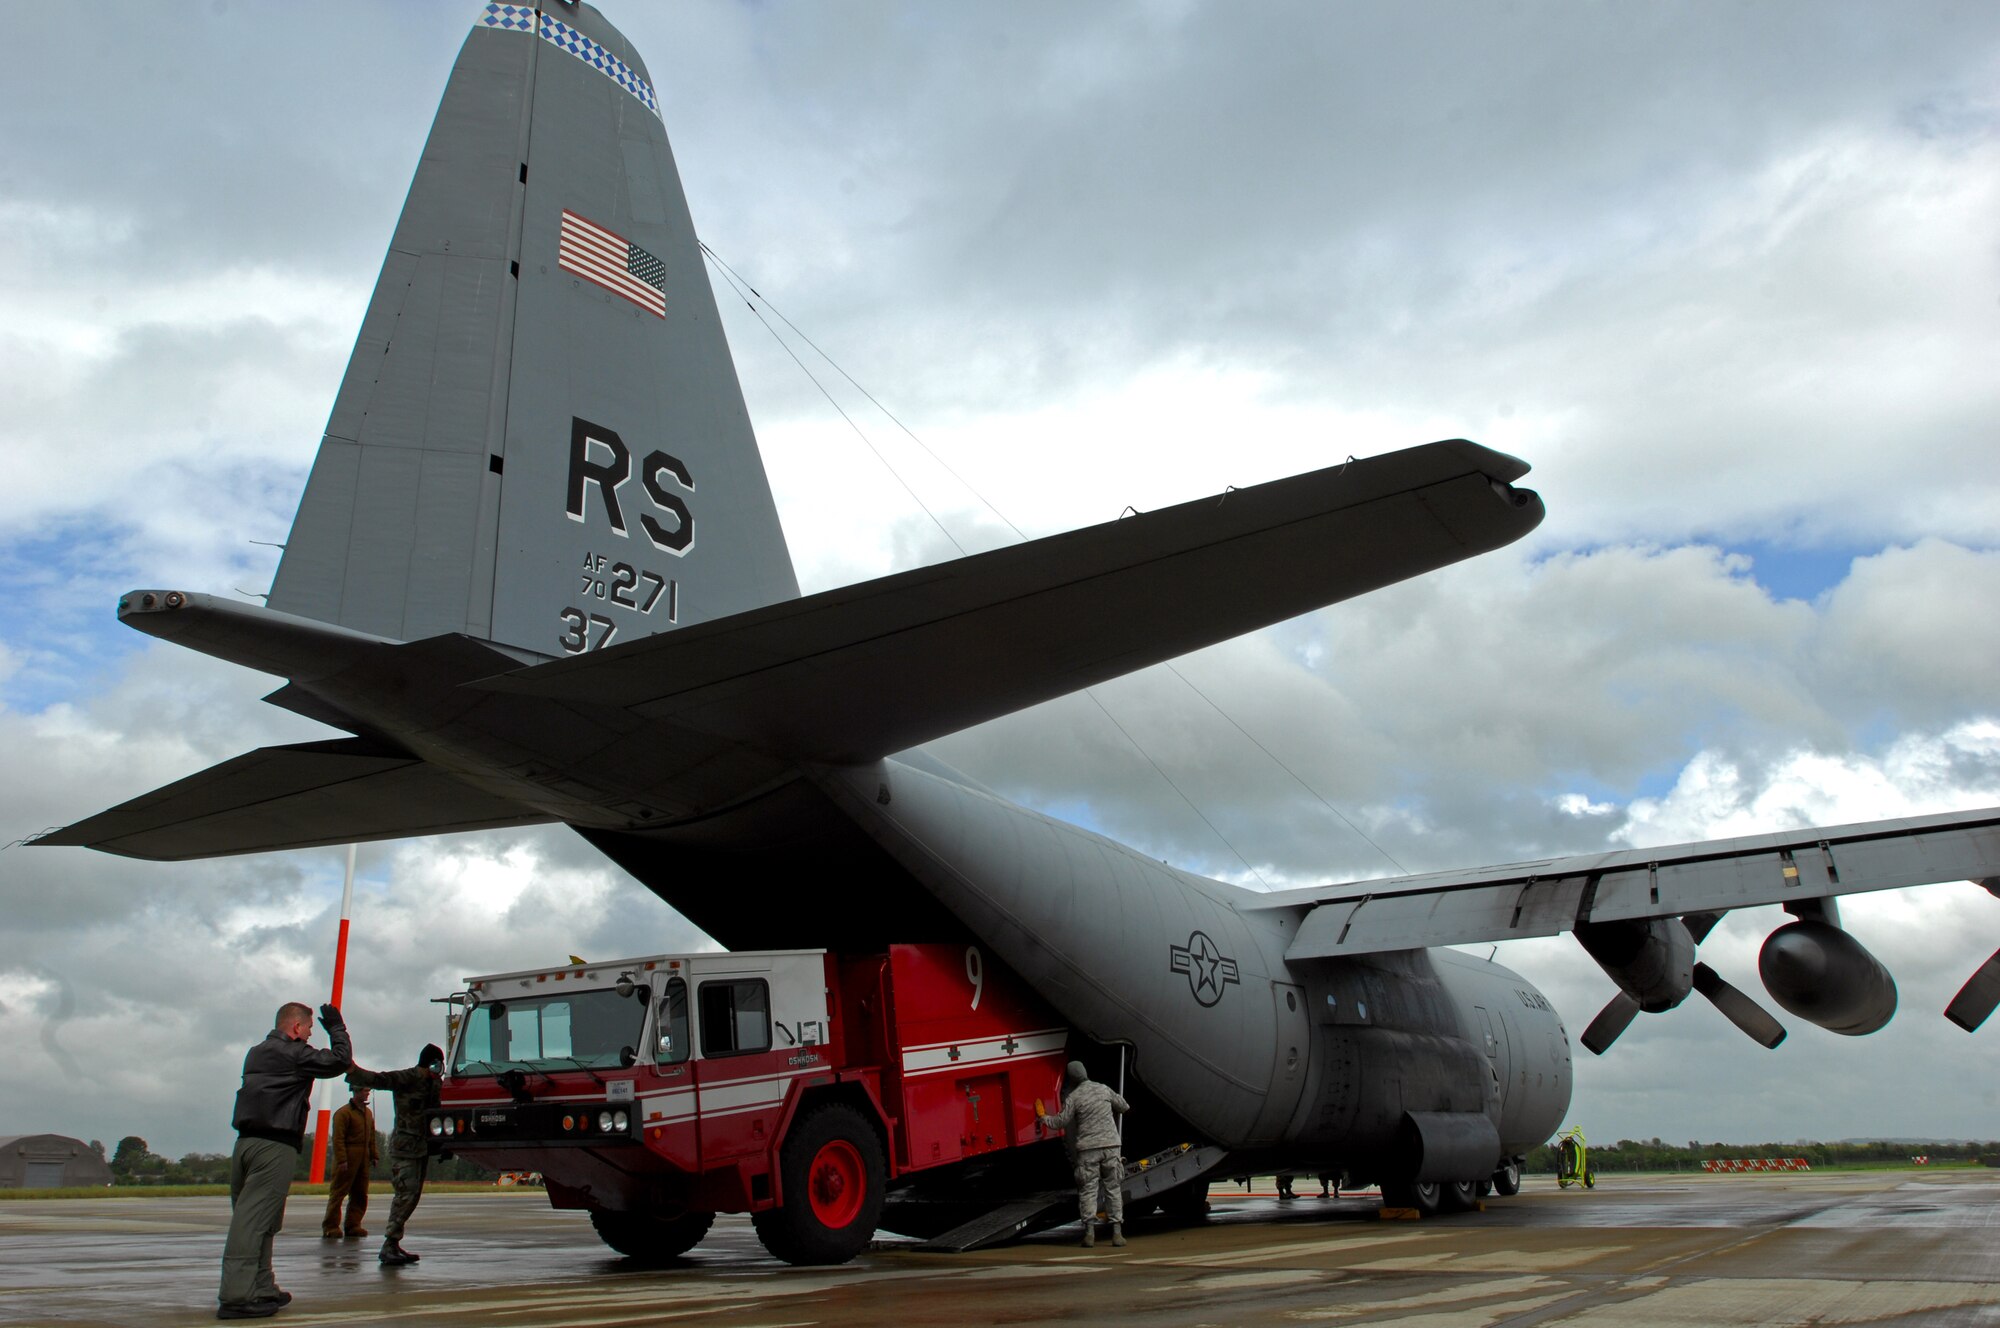 United States Air Force crew chiefs and loadmasters with the 37th Airlift Squadron and firefighters with the 835th Civil Engineer Squadron, load a fire truck on to a C-130 Hercules in support of an Operational Readiness Exercise, May 17, 2009, RAF Fairford, England. The fire truck was then flown to West Freugh Airfield, Scotland to begin the ORE. (U.S. Air Force photo by Senior Airman Kenny Holston)